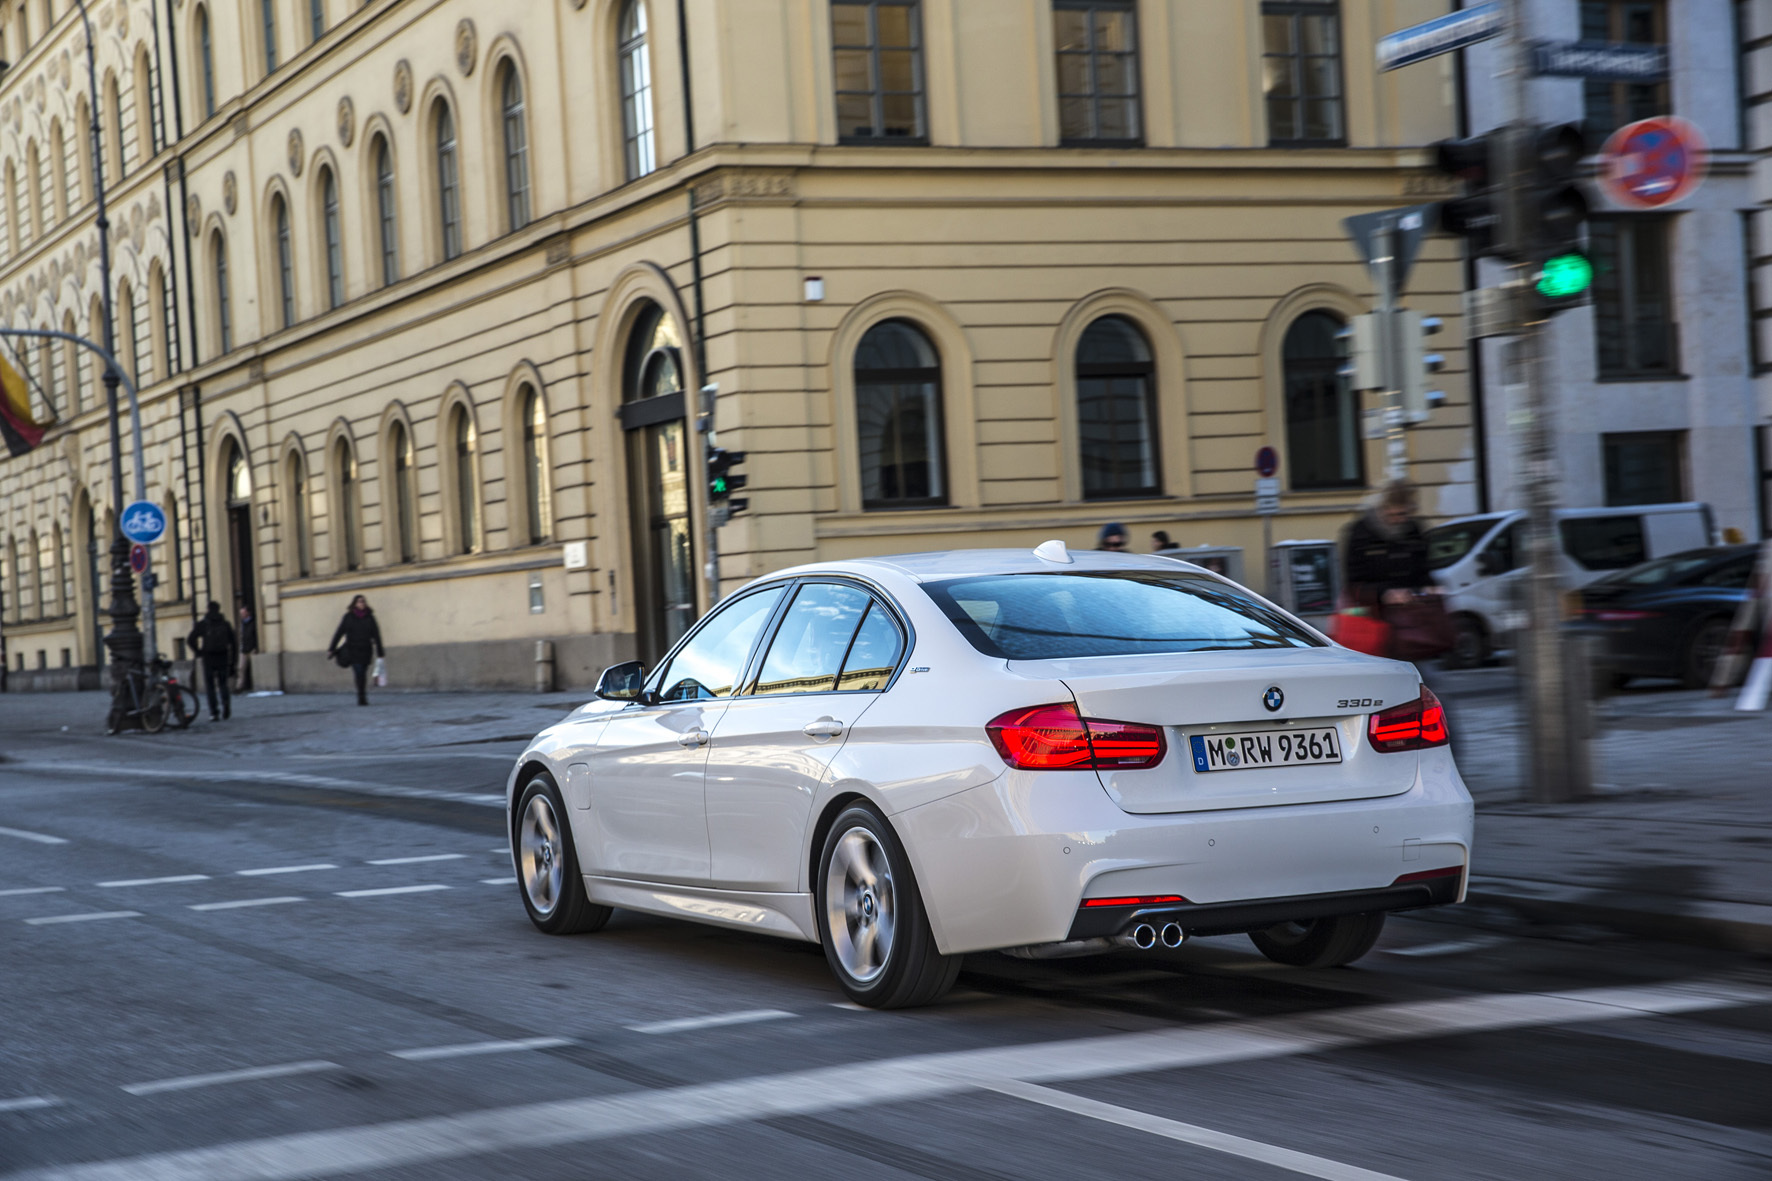 The BMW 330e is a conventional executive saloon car with a modern twist. The hybrid powertrain allows it to drive on full electric mode on city streets.